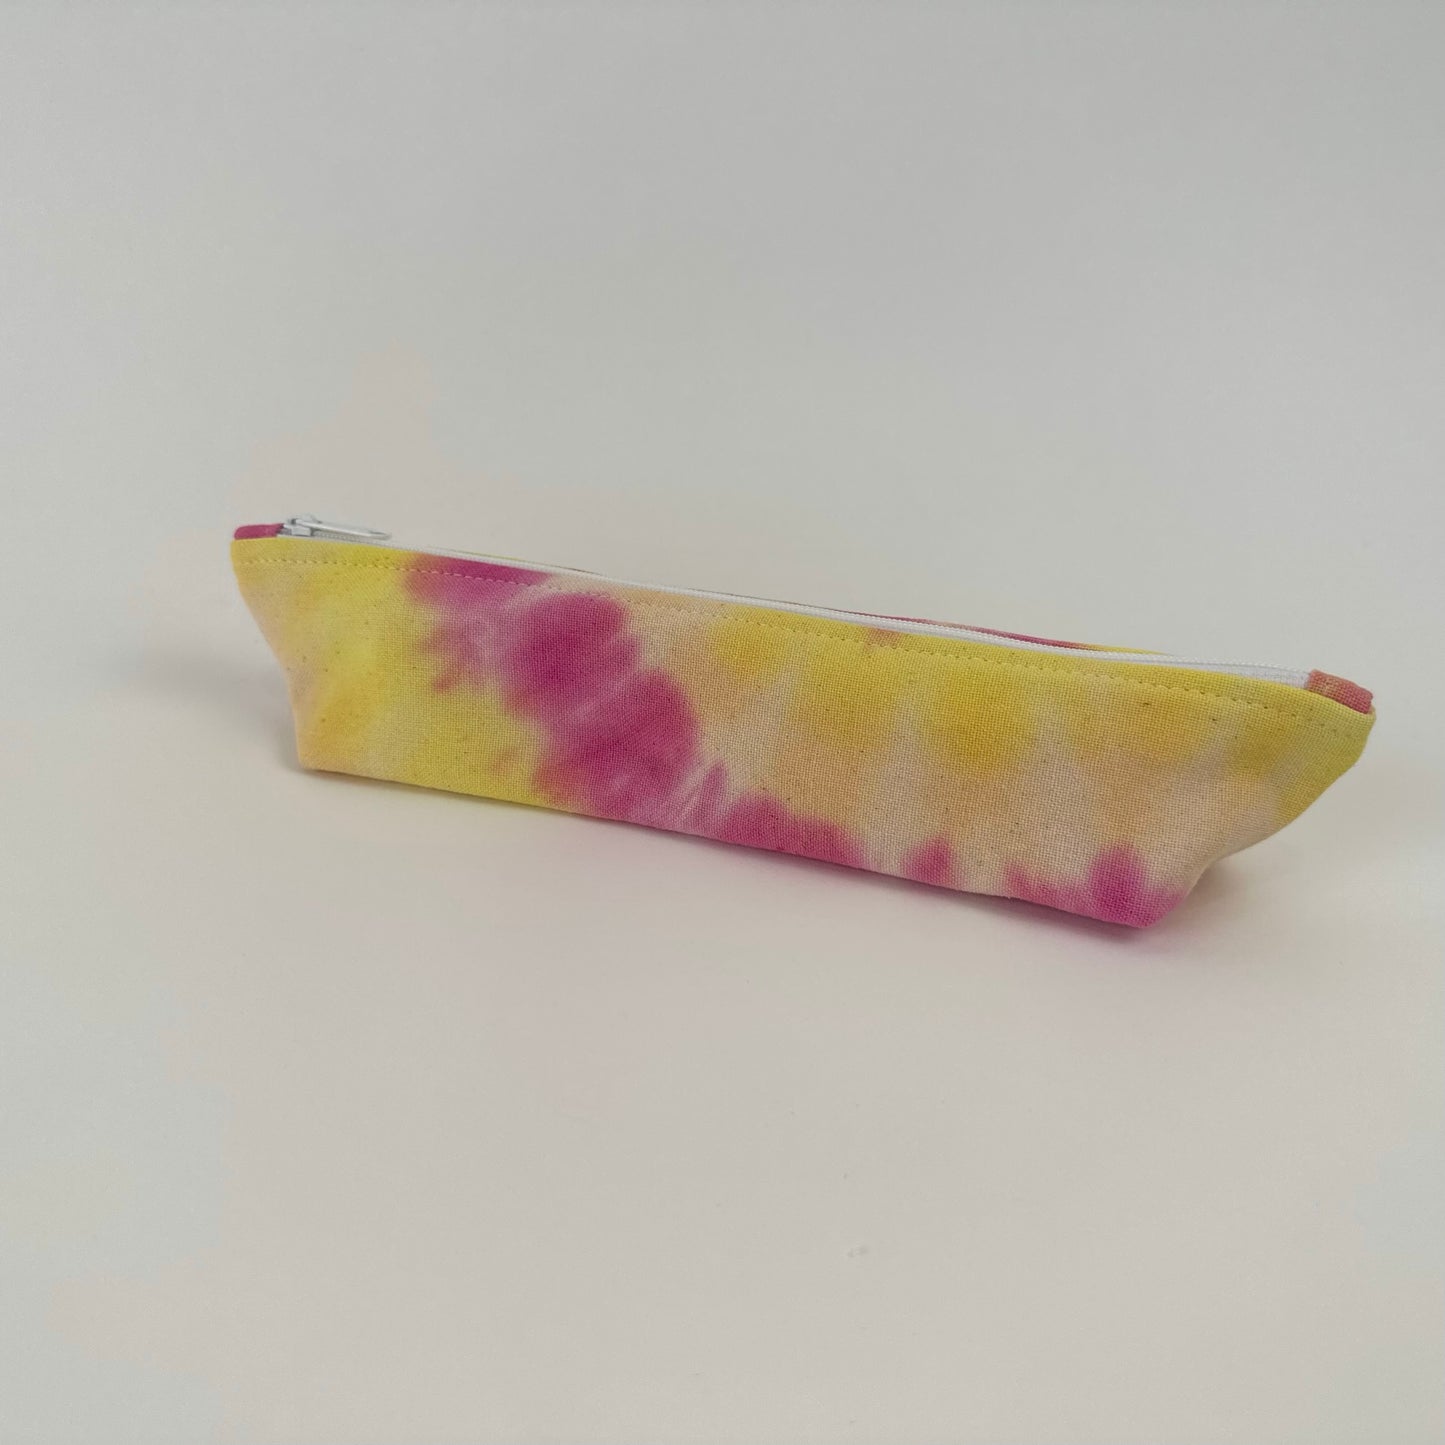 Miche Niche zipper pouch in a hand dyed tie dye pattern of yellow and pink